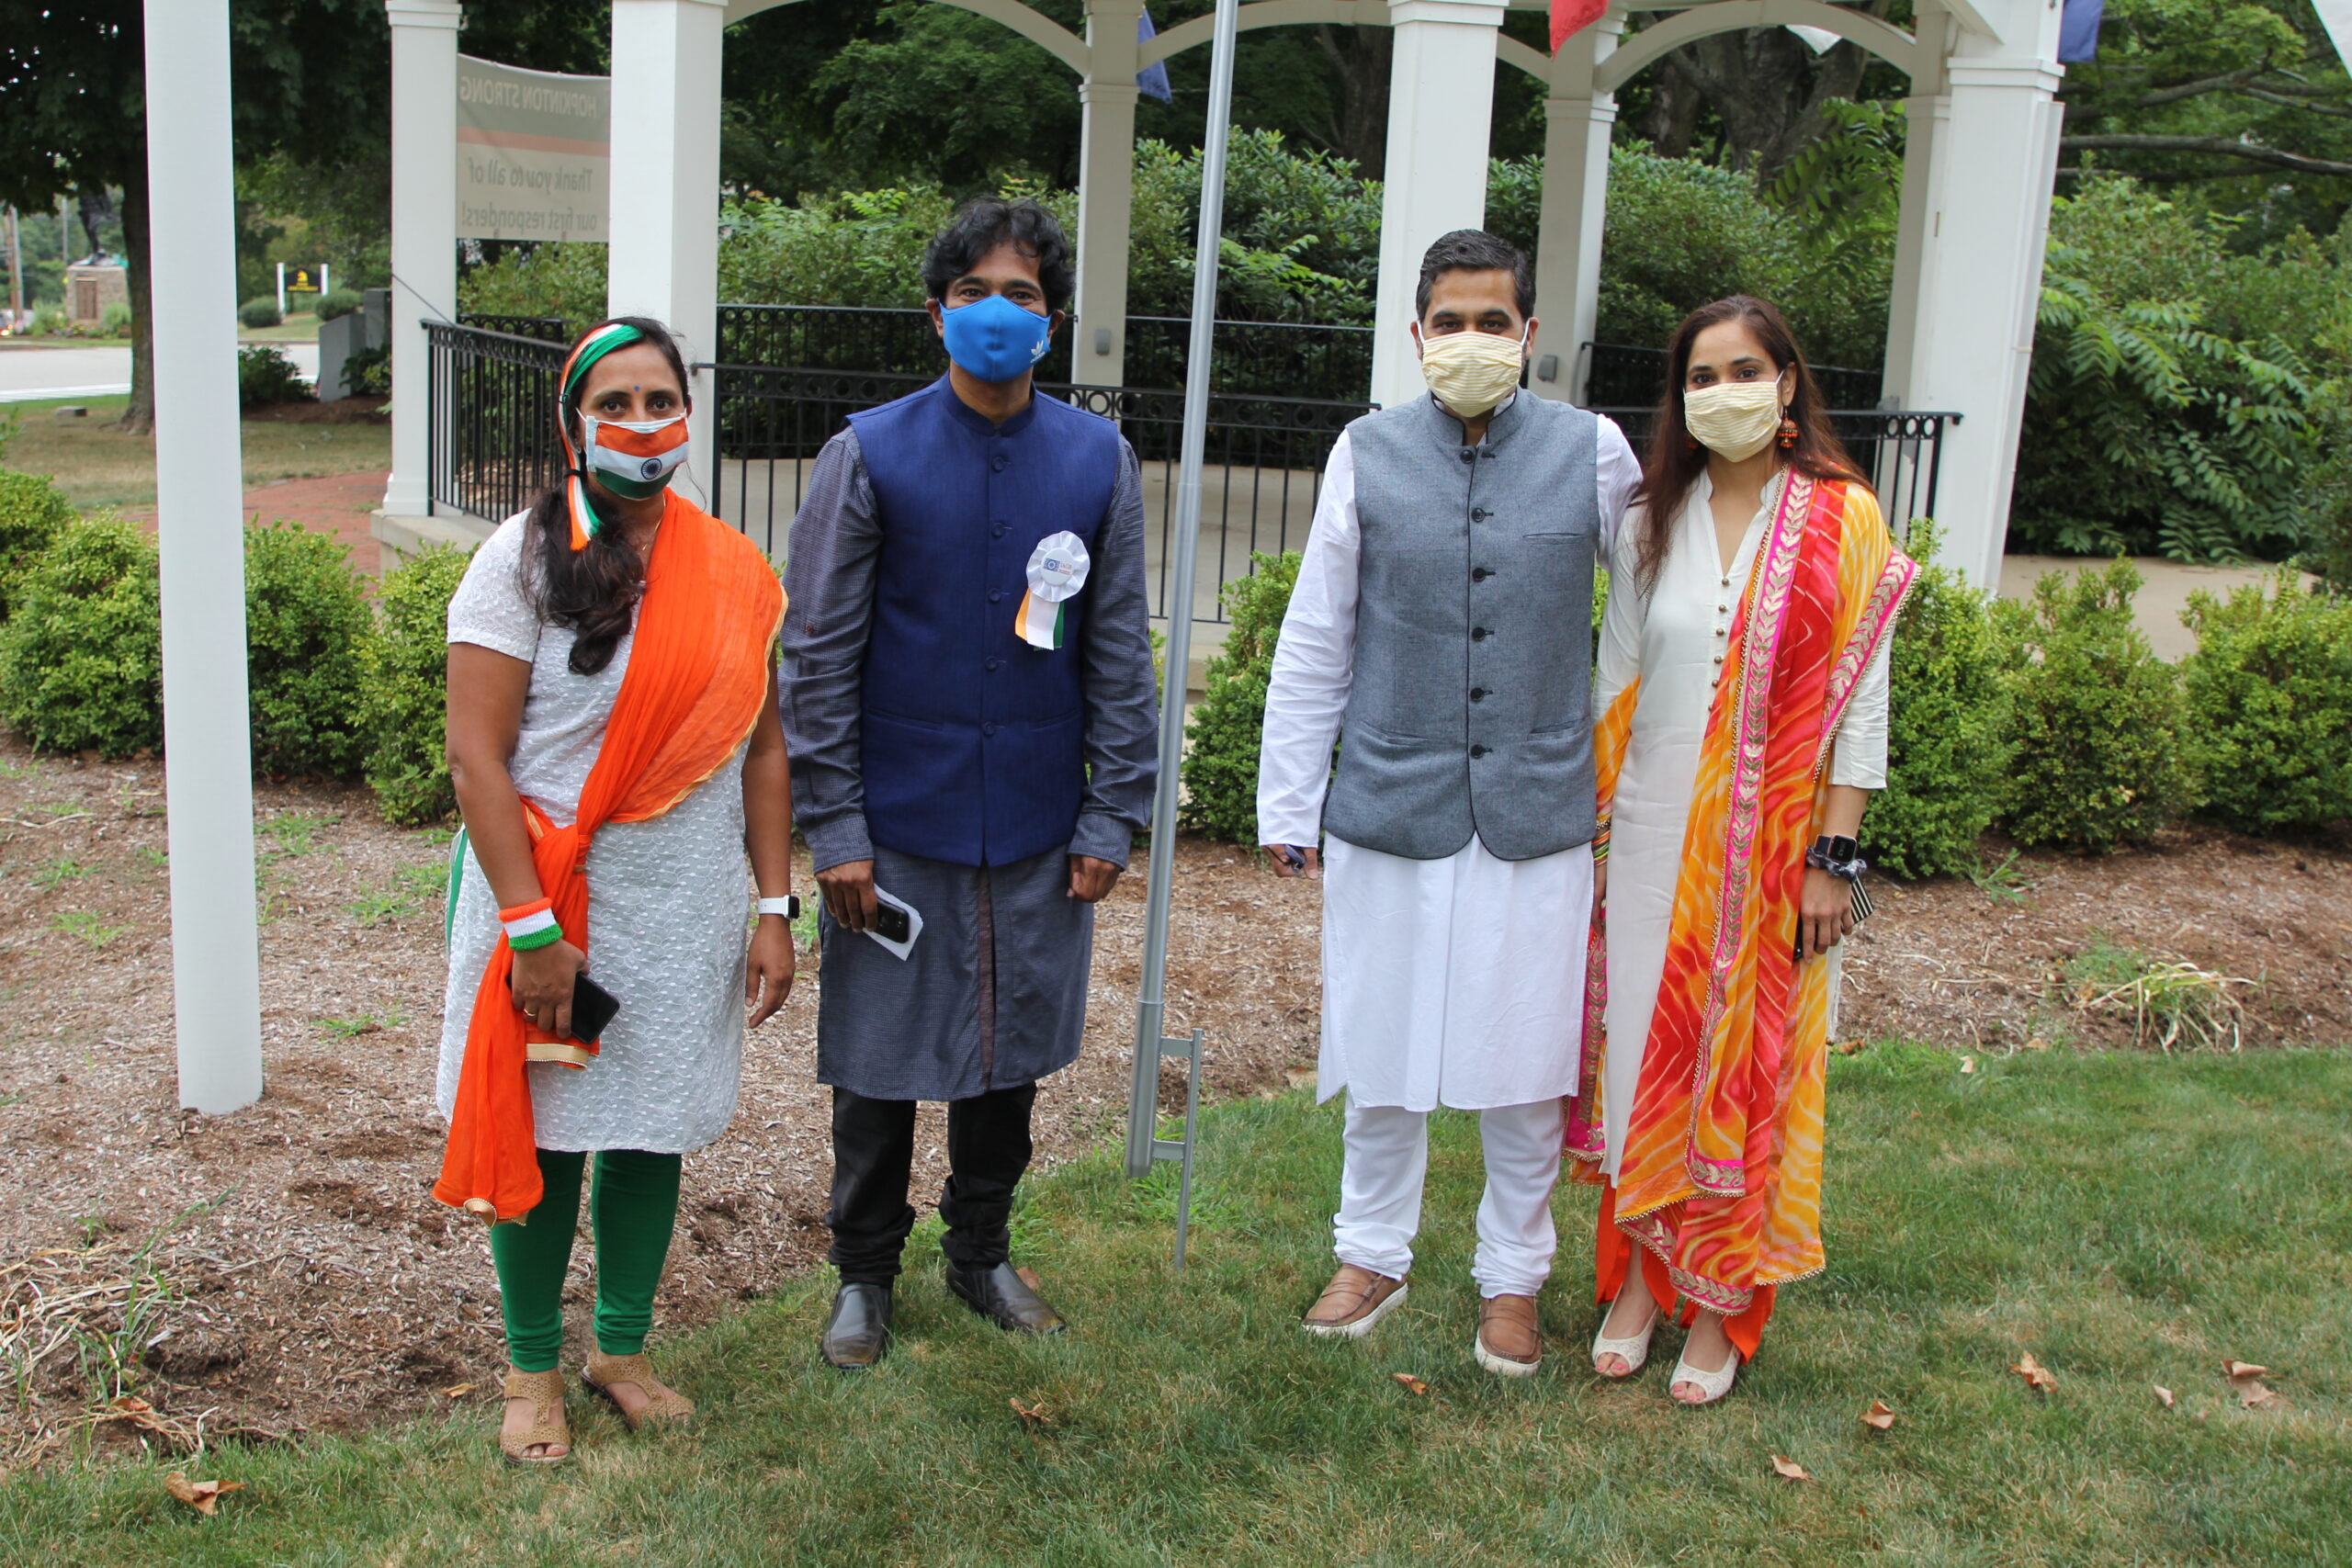 India Association thanks Hopkinton community for ‘unconditional support’ after incident